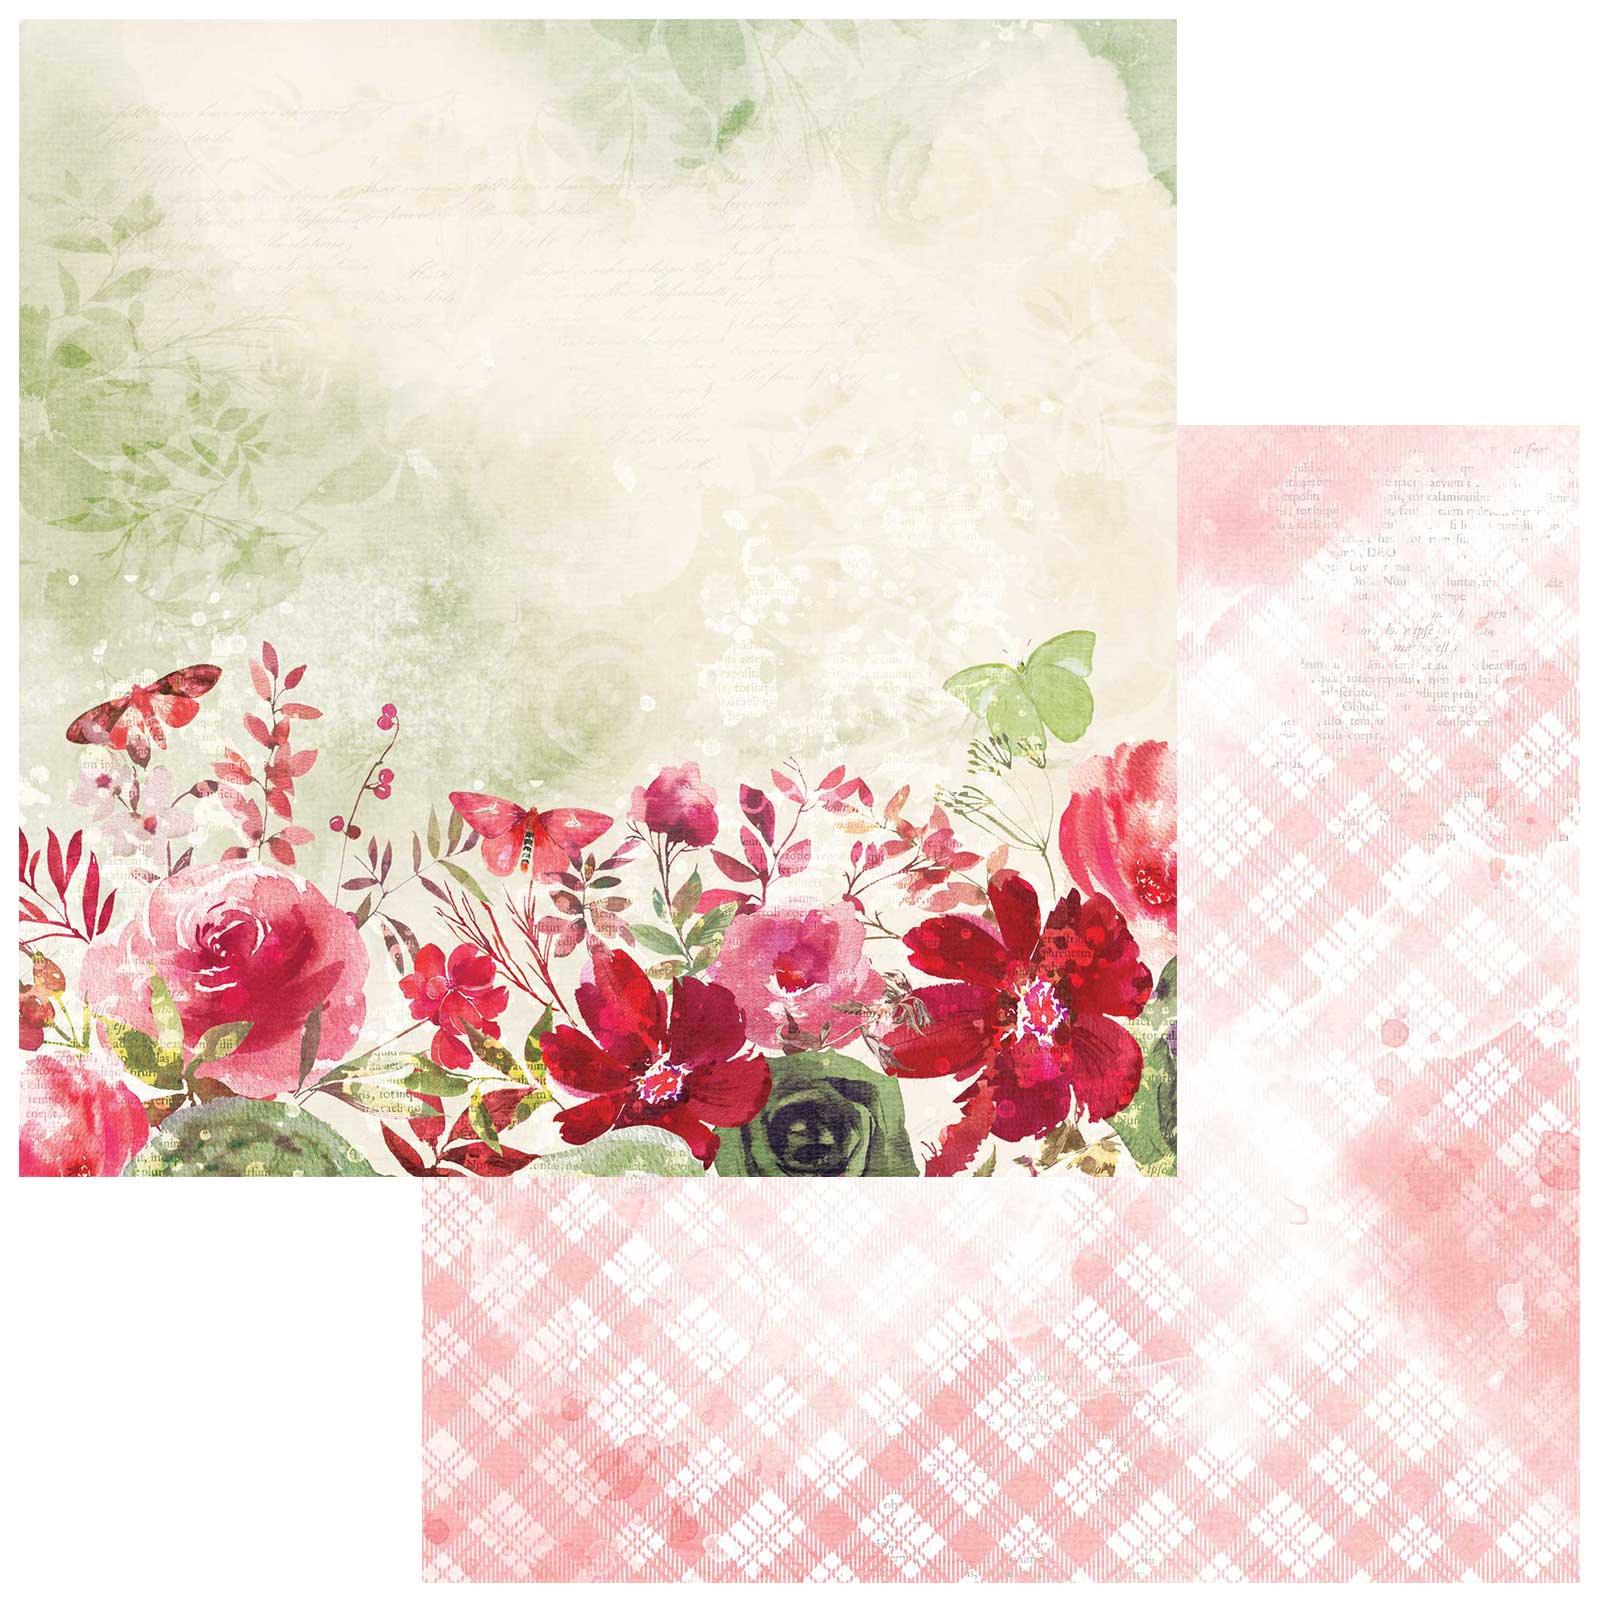 49 And Market Collection Pack 12X12 - ARToptions Rouge - Crafty Divas